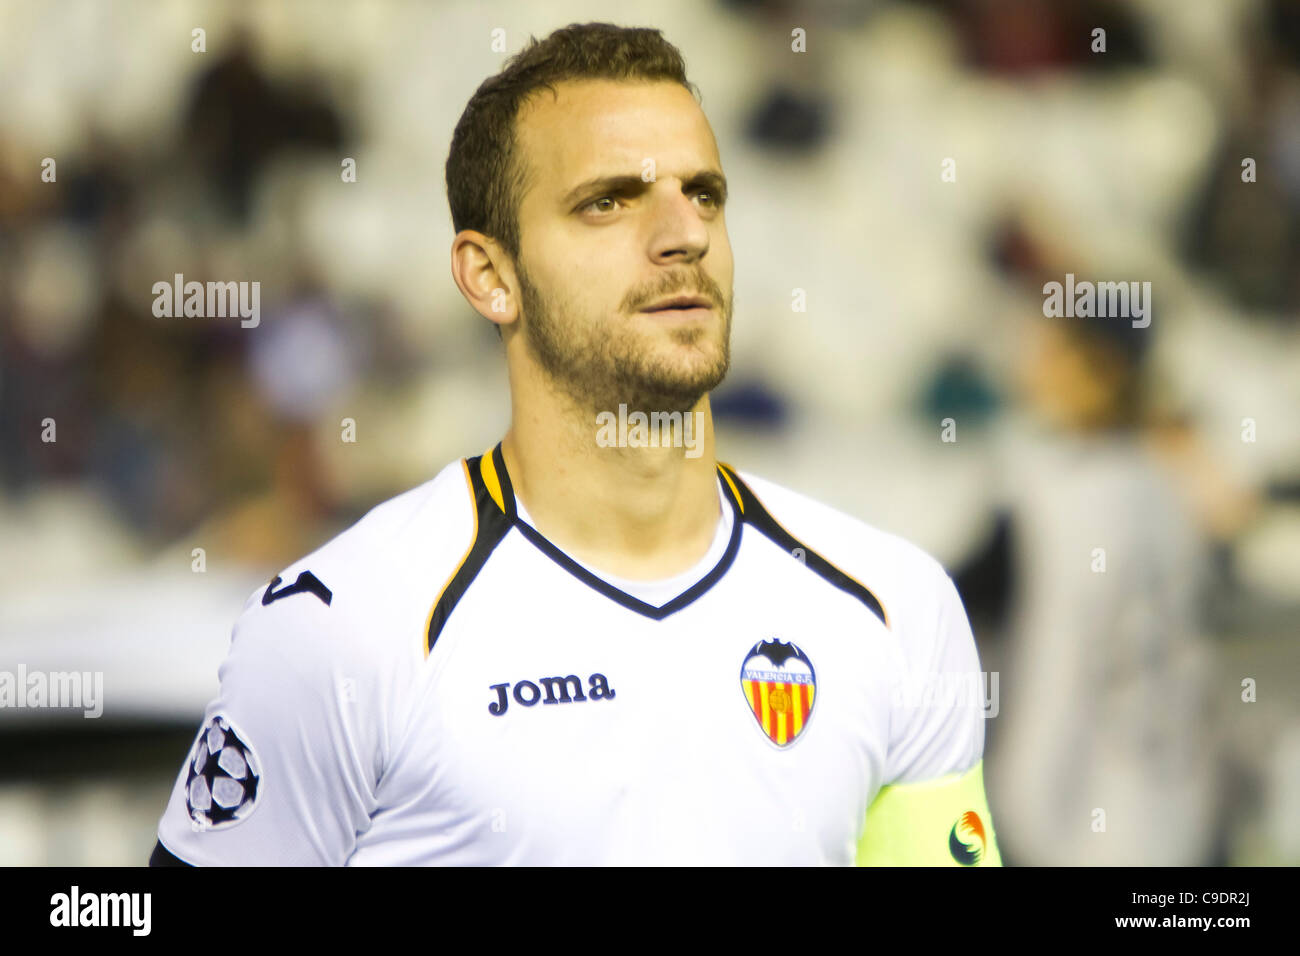 23/11/2011. Valencia, Spain  Football match between Valencia Club de Futbol and KRC Genk, Matchday 5, E Group, Champions League -------------------------------------  Roberto Soldado, from Valencia CF scored 3 goals in the game that finished 7-0 for Valencia CF Stock Photo